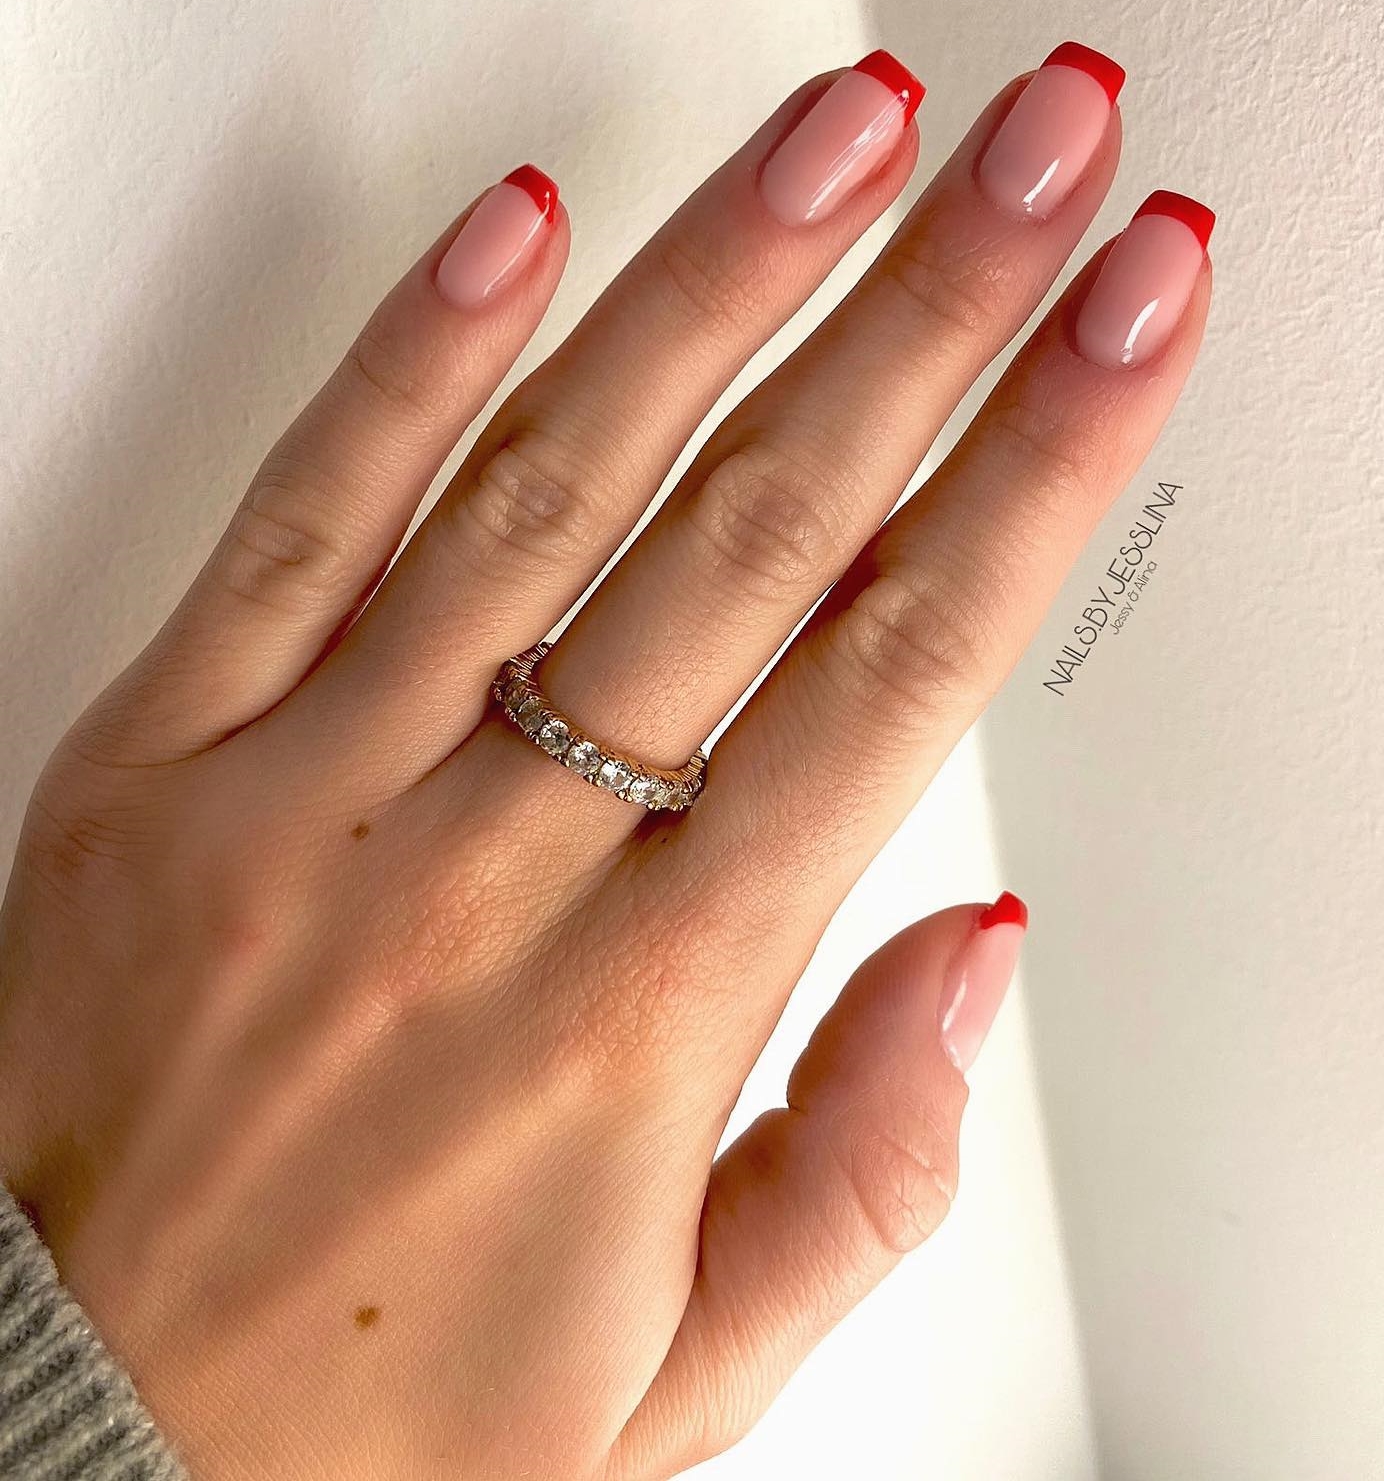 Short Square Nails with Red Tips